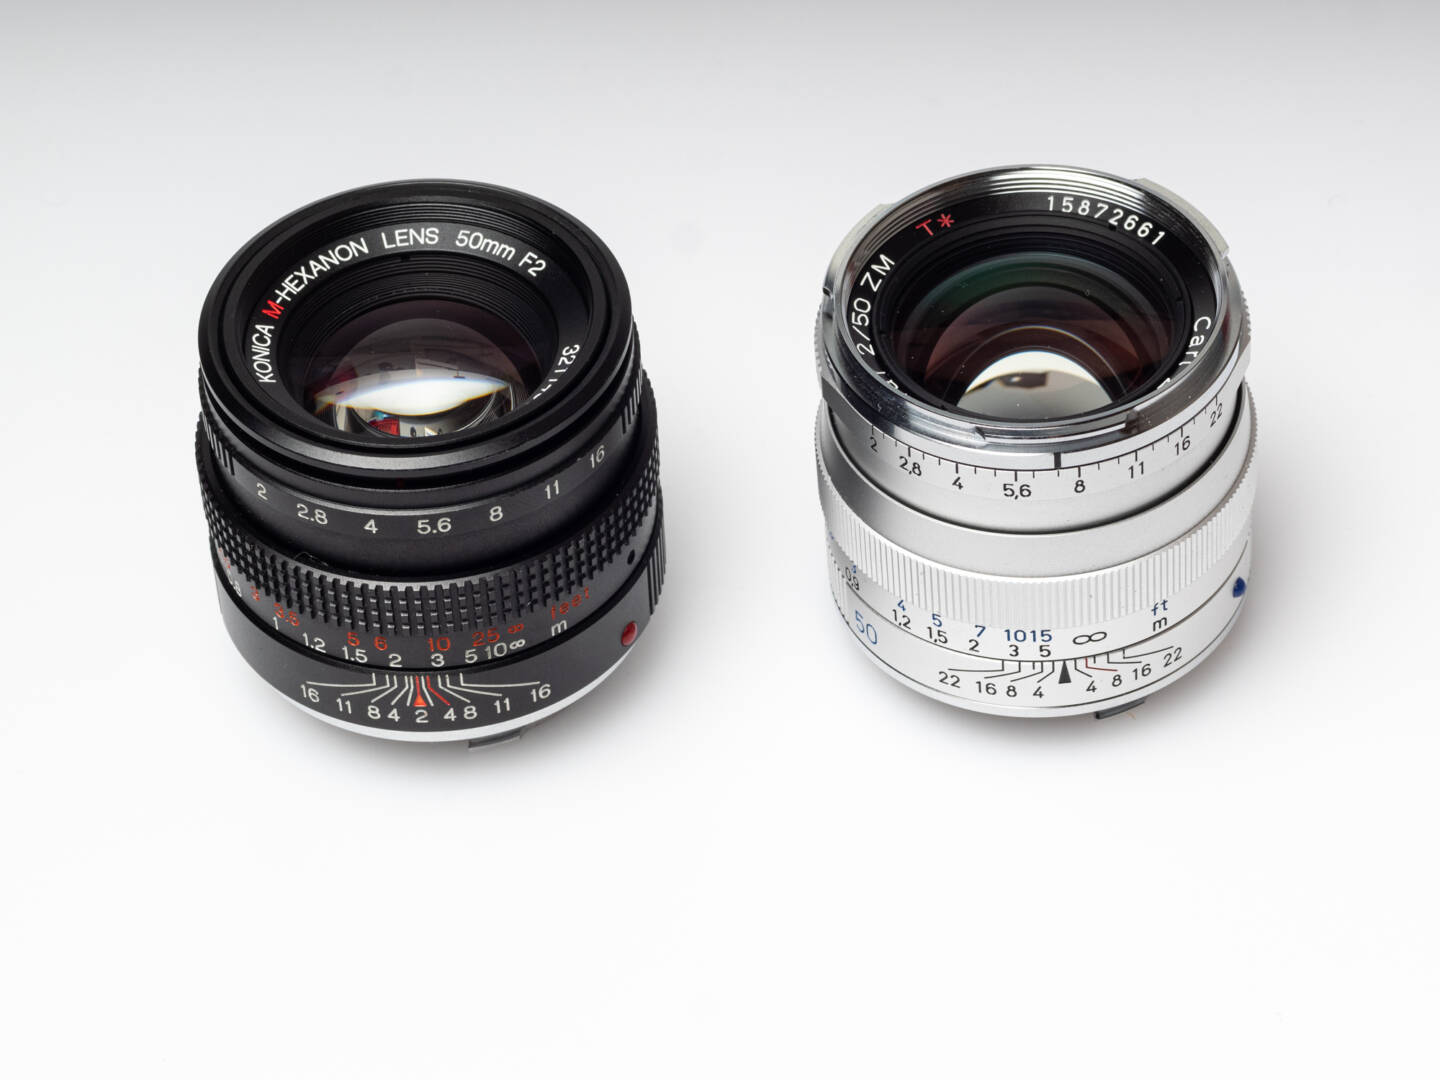 Two non-Leica standard lenses with M mount: Konica M-Hexanon 50/2 and Zeiss Planar 50/2